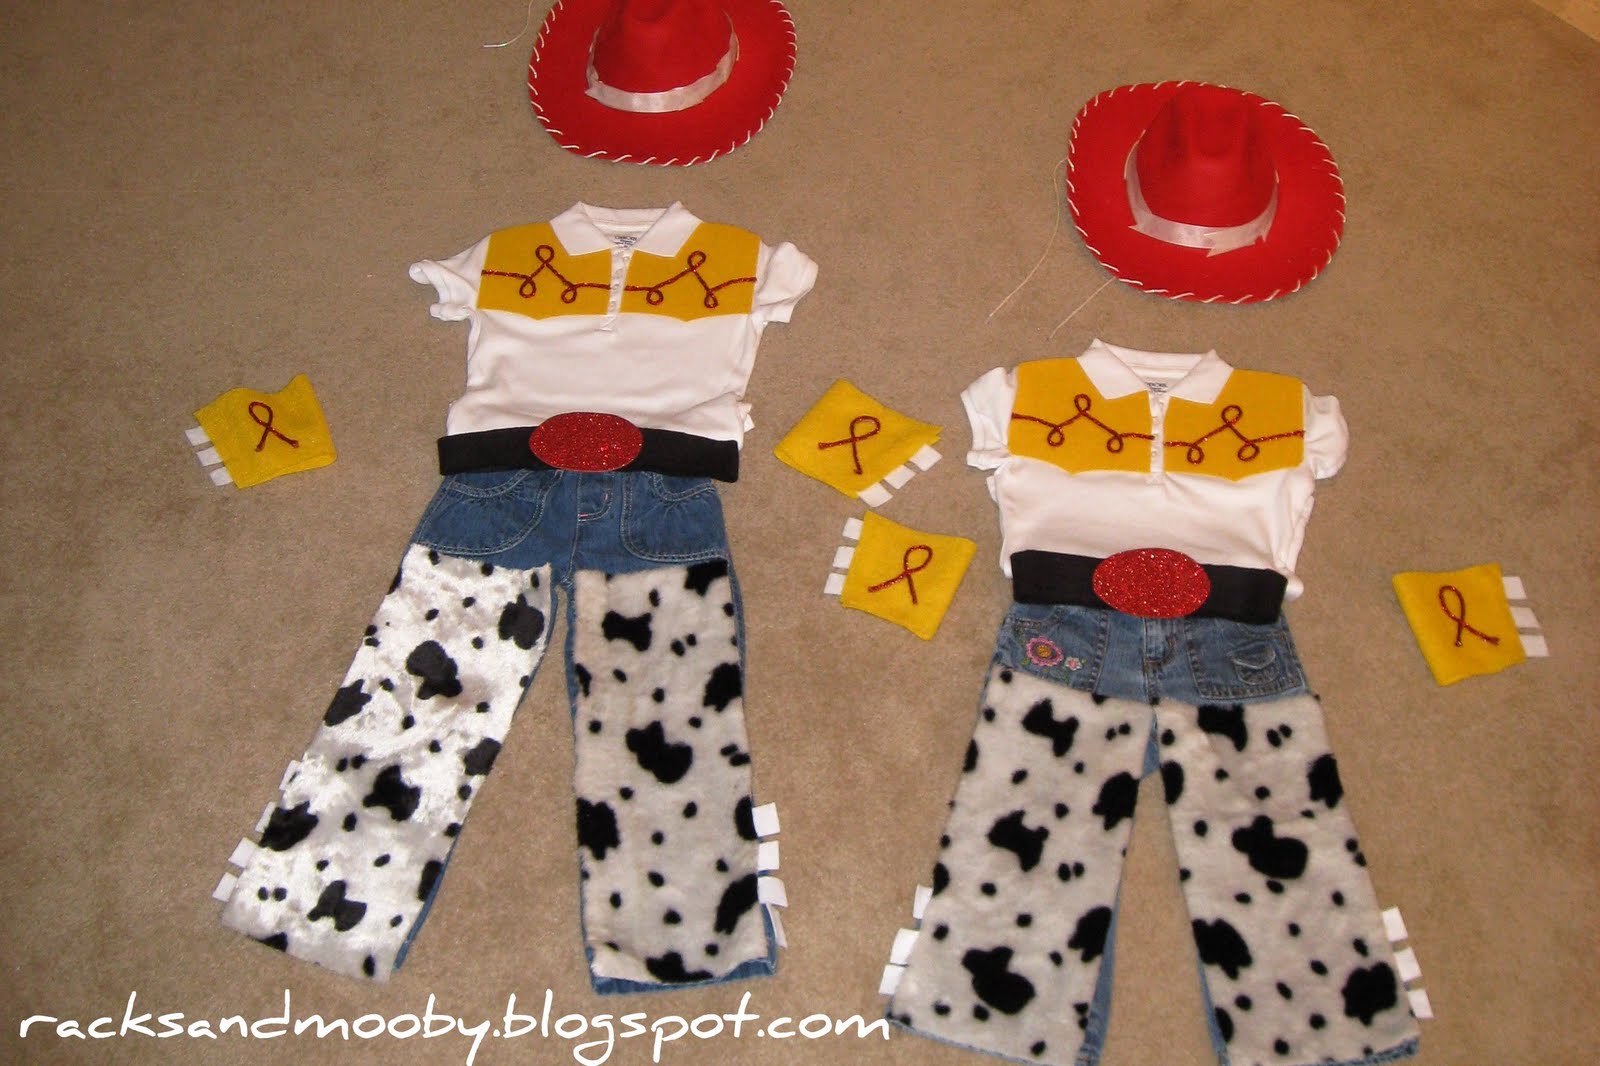 halloween cakes for kids party DIY Jessie from Toy Story Costumes - no sewing involved!